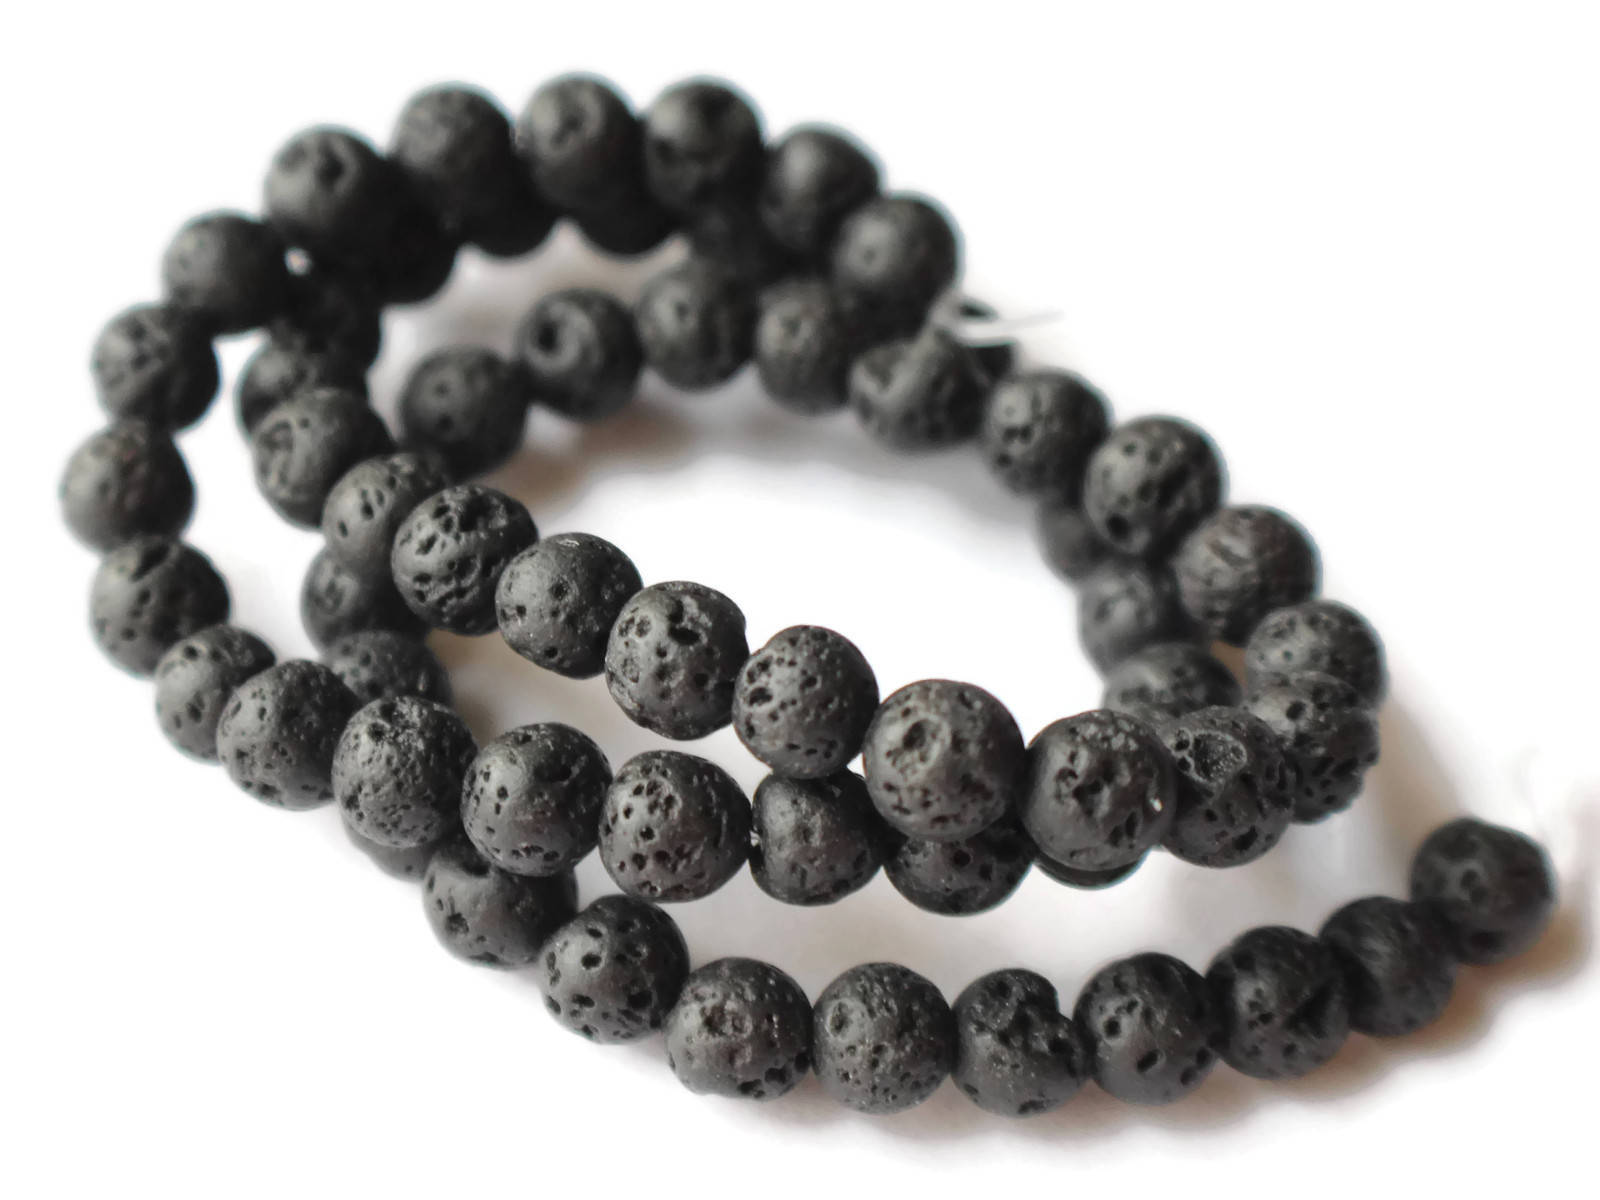 6mm, 8mm, 10mm Waxed Black Lava Beads Round Black Beads for Jewelry Making  Round Lava Stone Volcanic Rock Beads 6mm 8mm 10mm 